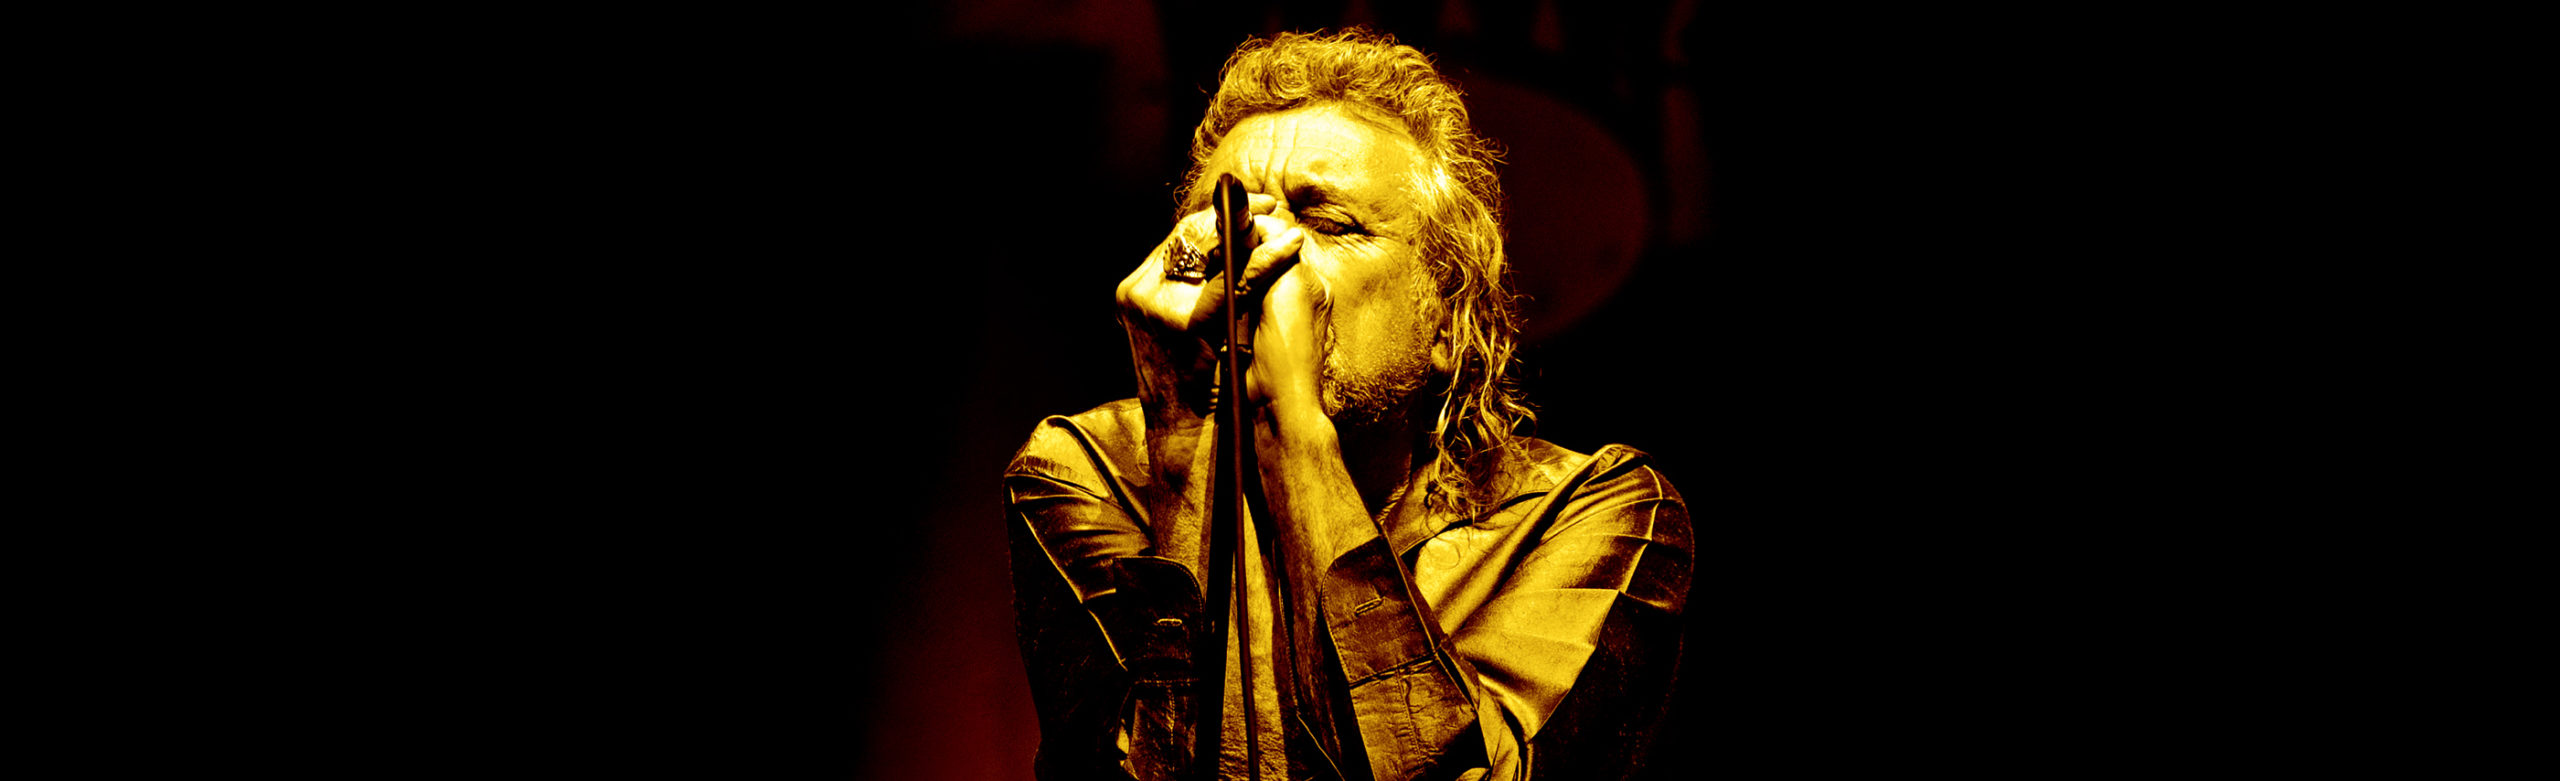 Robert Plant and The Sensational Space Shifters Confirm Montana Concert Image